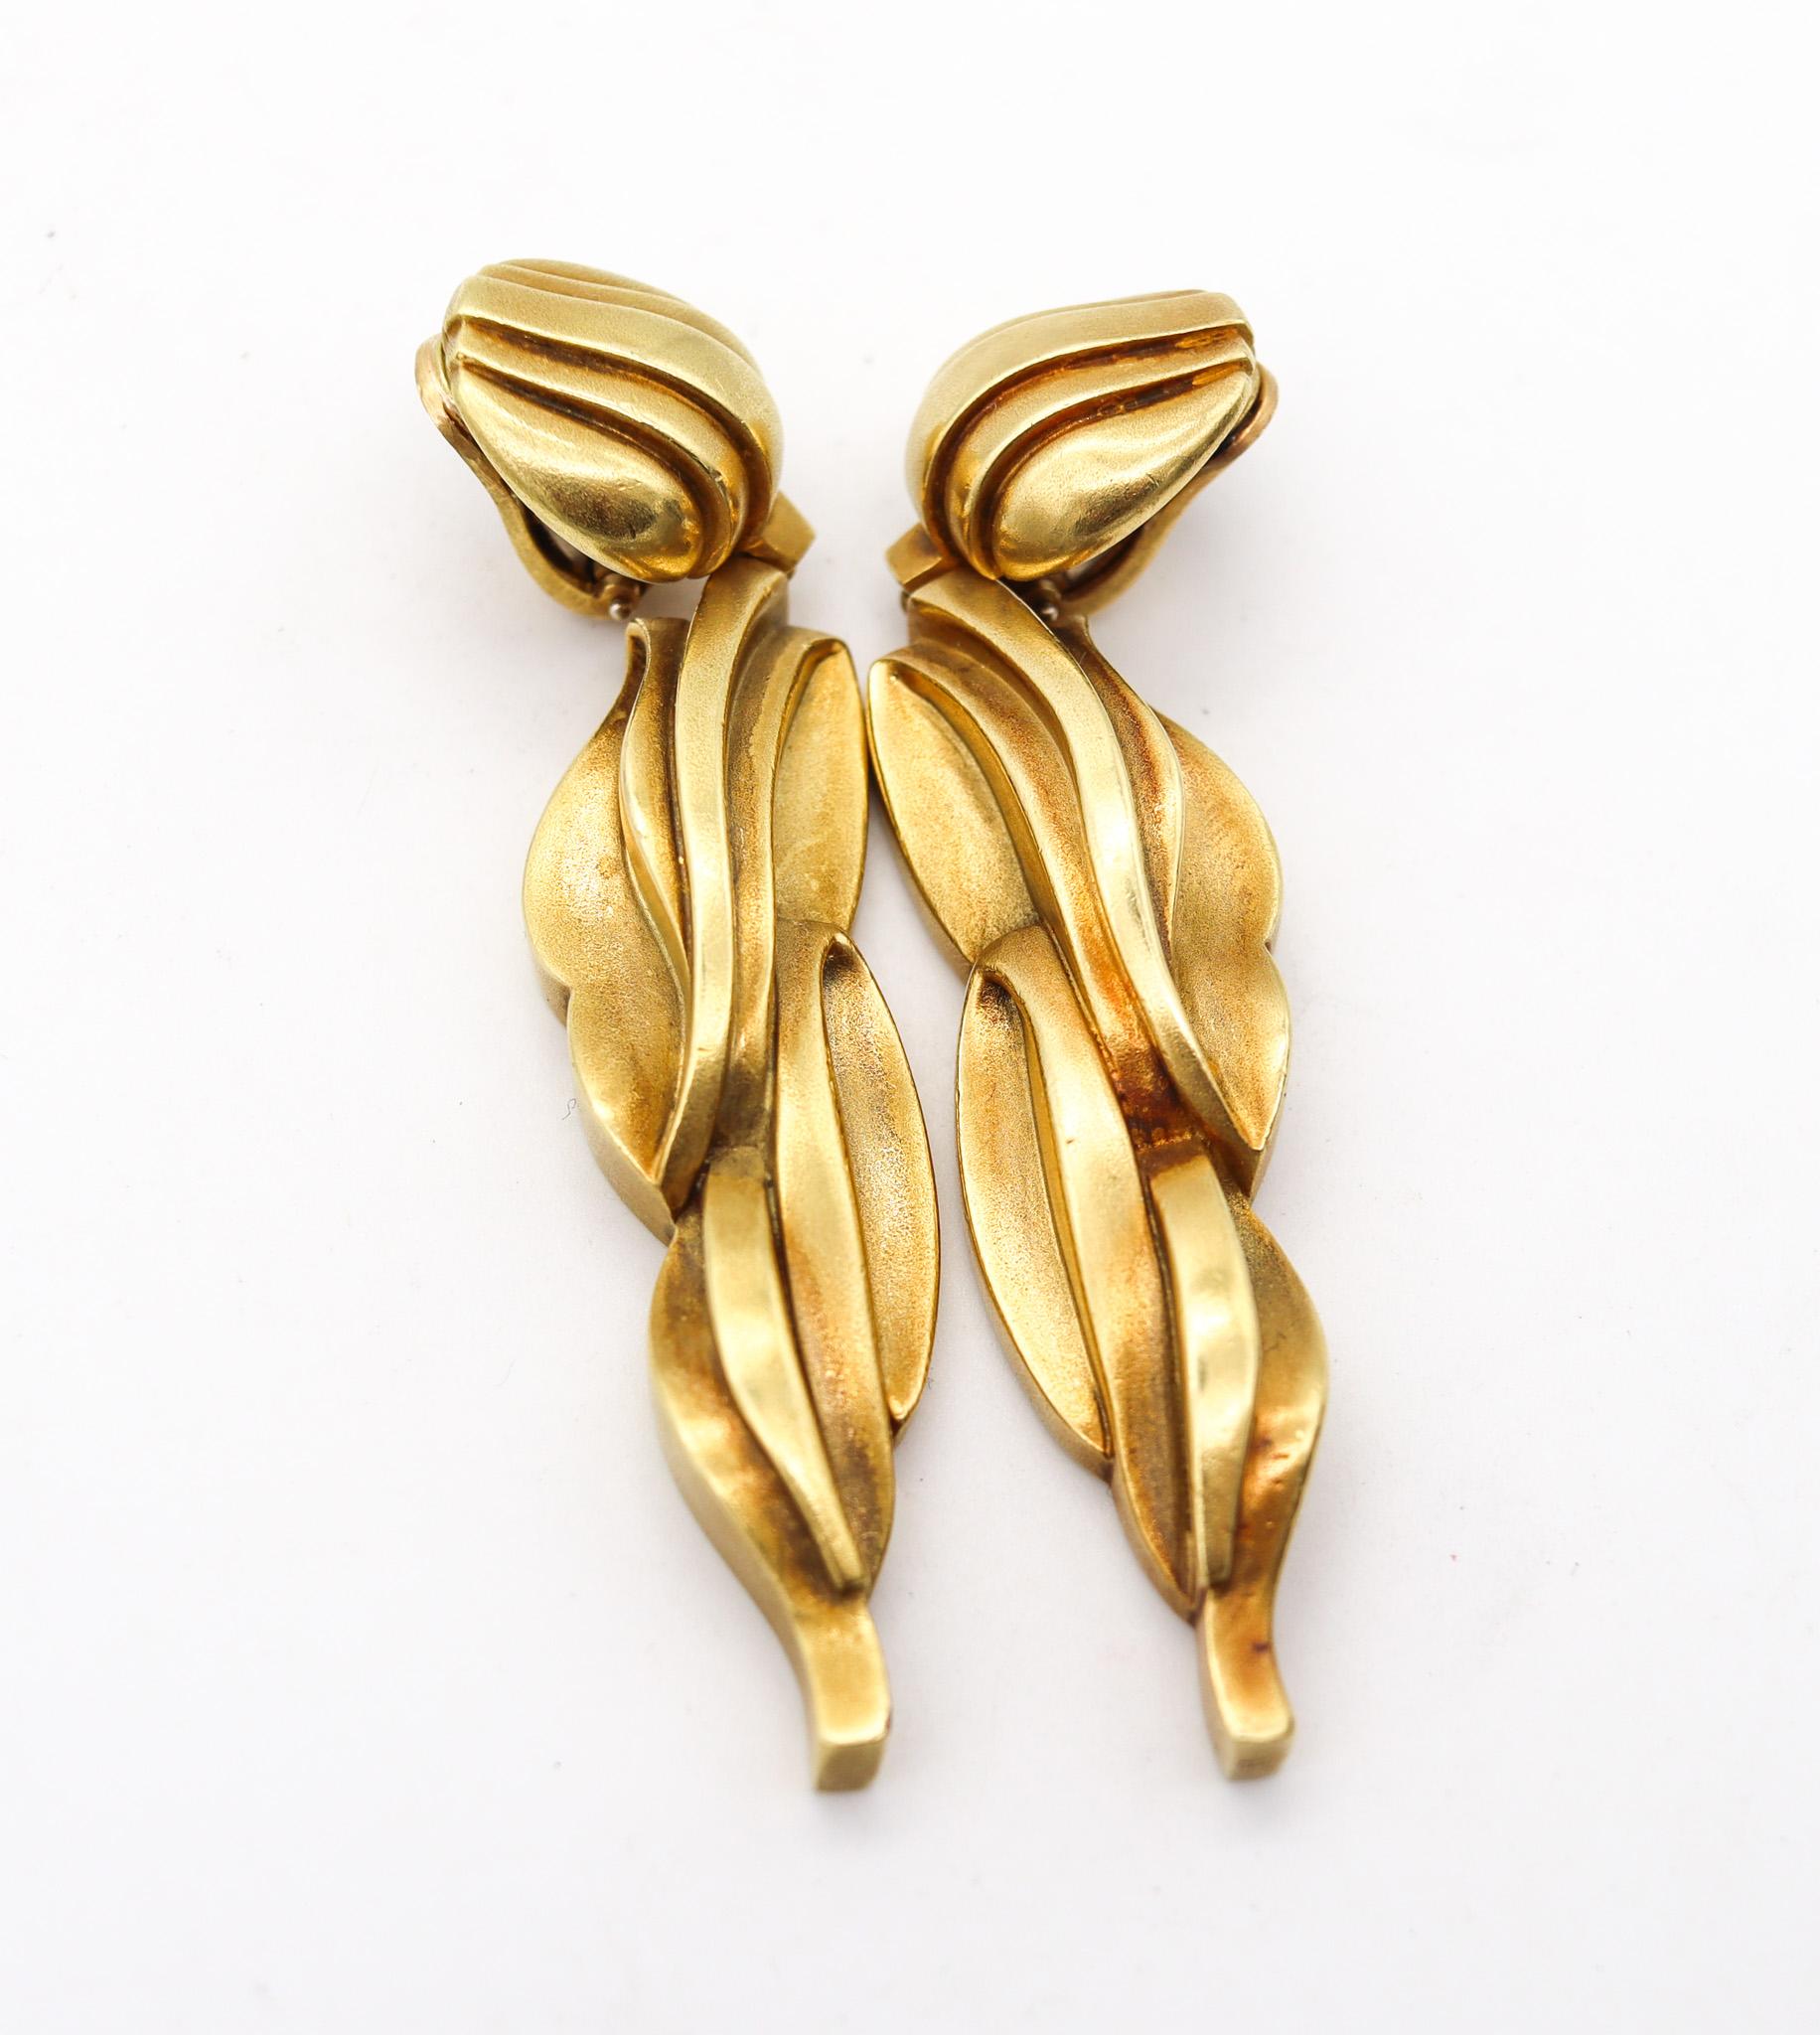 Kieselstein Cord 1983 Sculptural Dangle Drop Earrings Brushed 18Kt Yellow Gold In Excellent Condition For Sale In Miami, FL